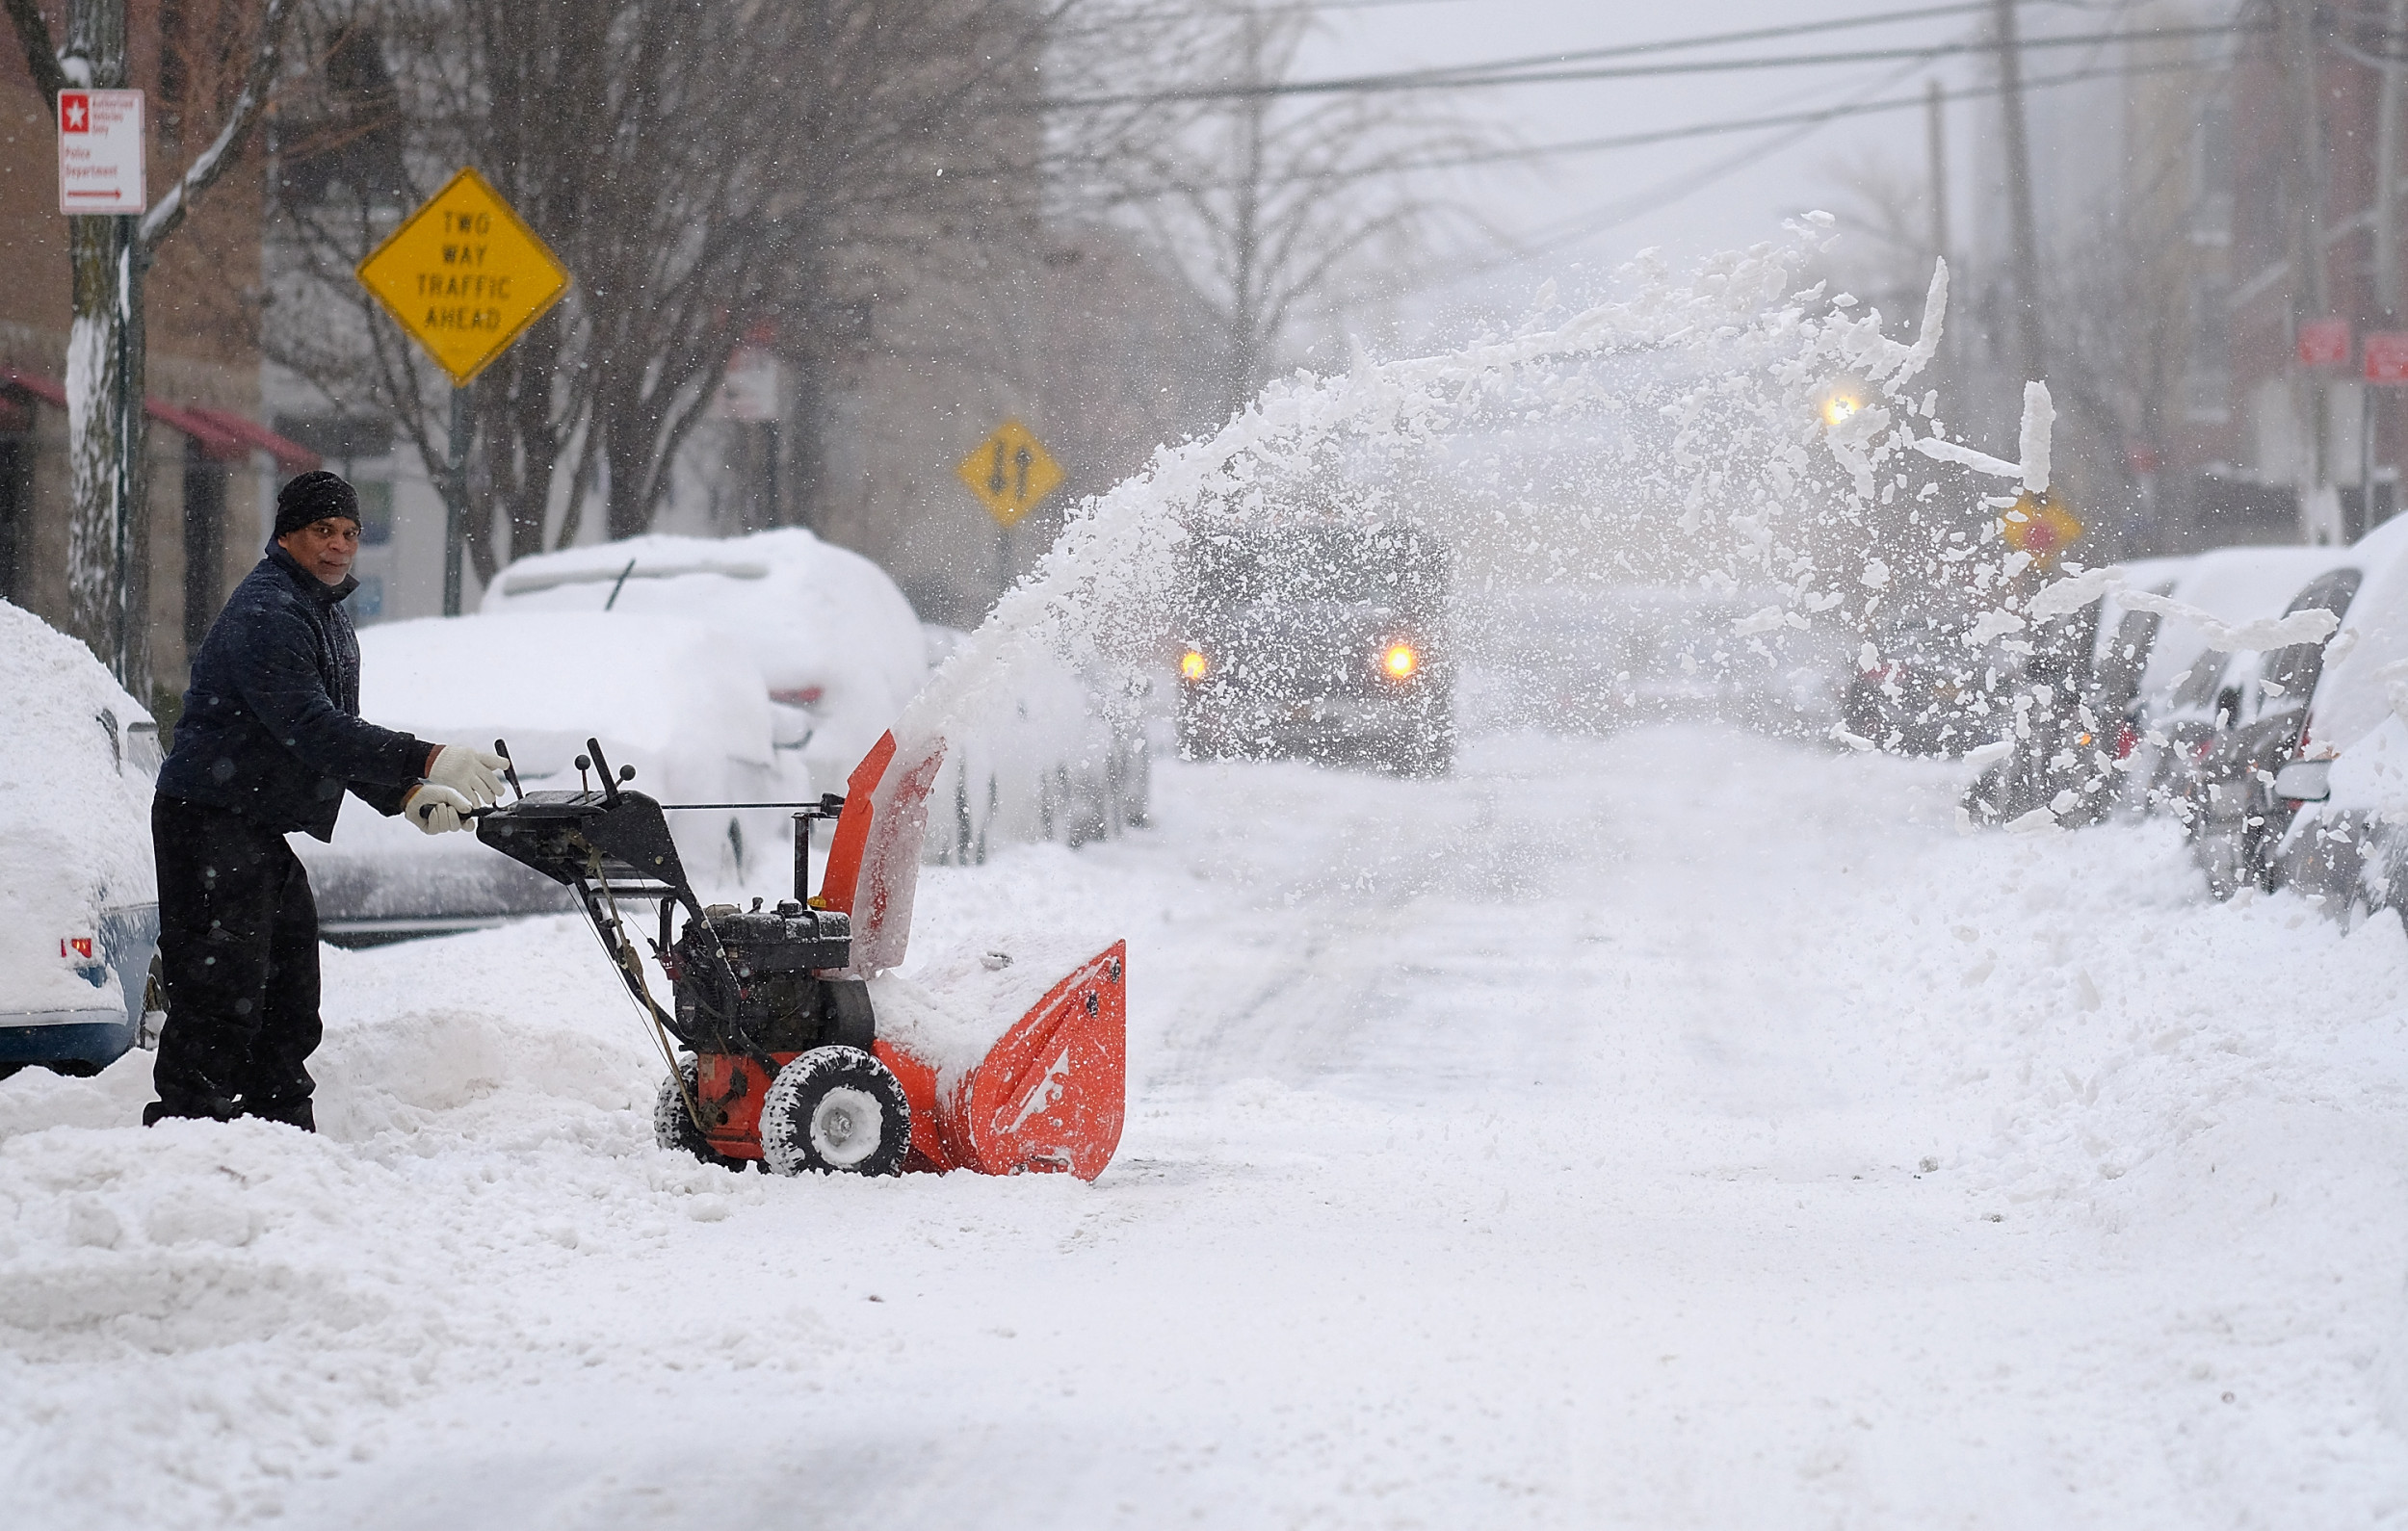 Winter Storm Update Thousands of Power Outages, Flight Delays Across